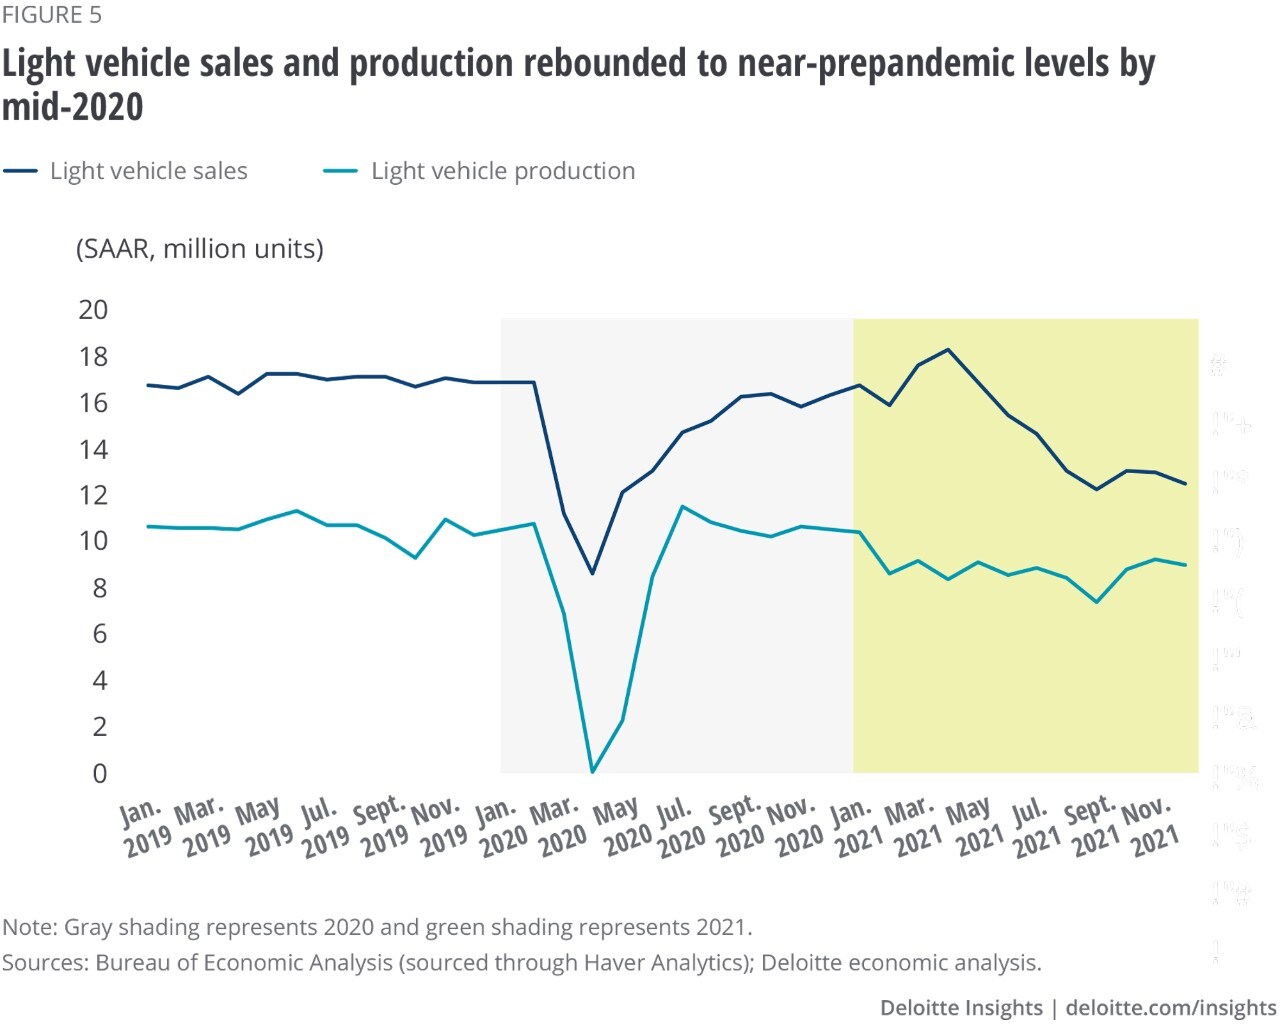 Figure 5. Light vehicle sales and production rebounded to near prepandemic levels by mid-2020